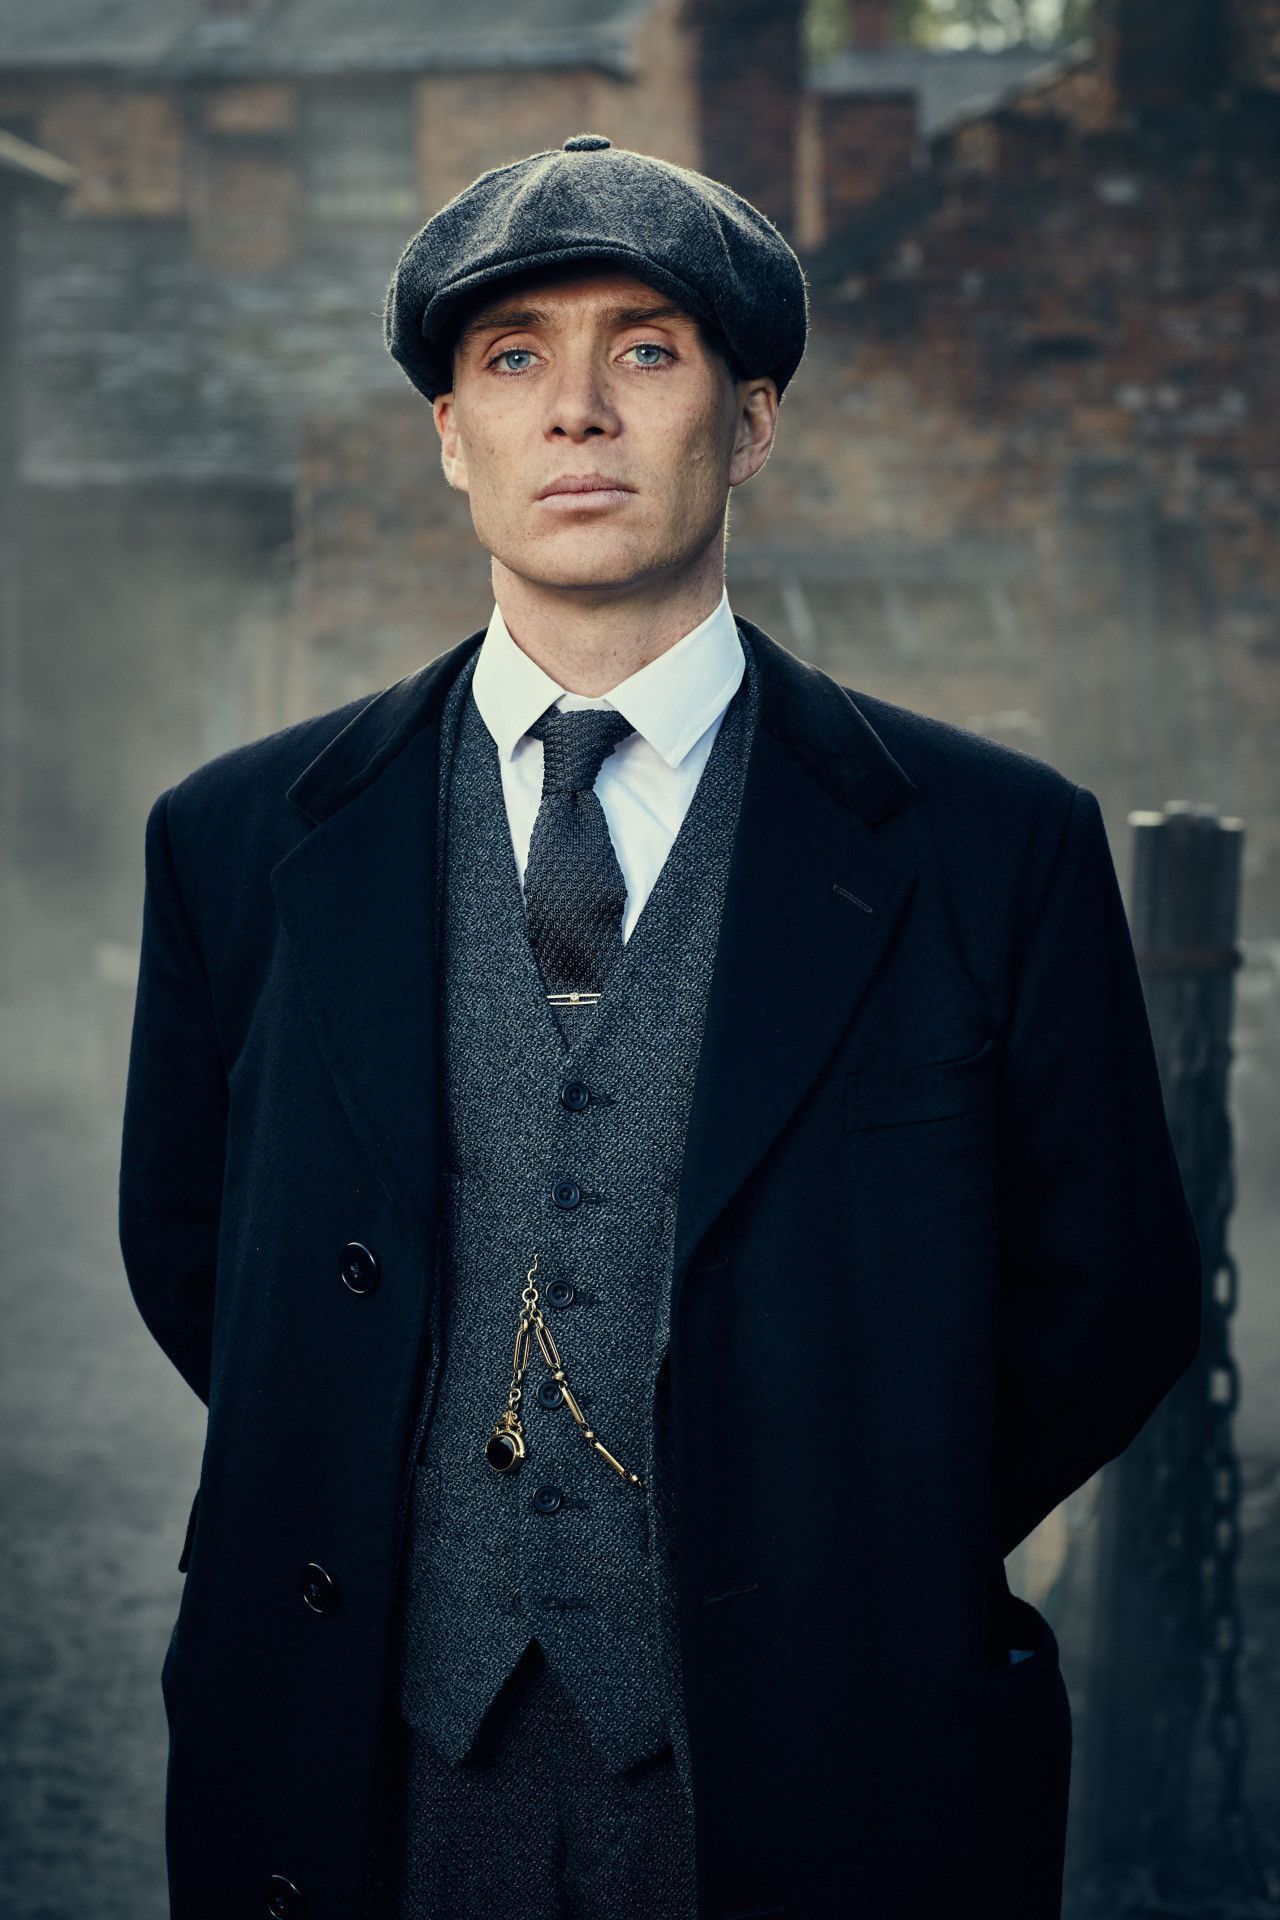 Free download tommy shelby wallpapers top tommy shelby backgrounds for desktop mobile tablet x â peaky blinders fotos de filmes fatos historicos